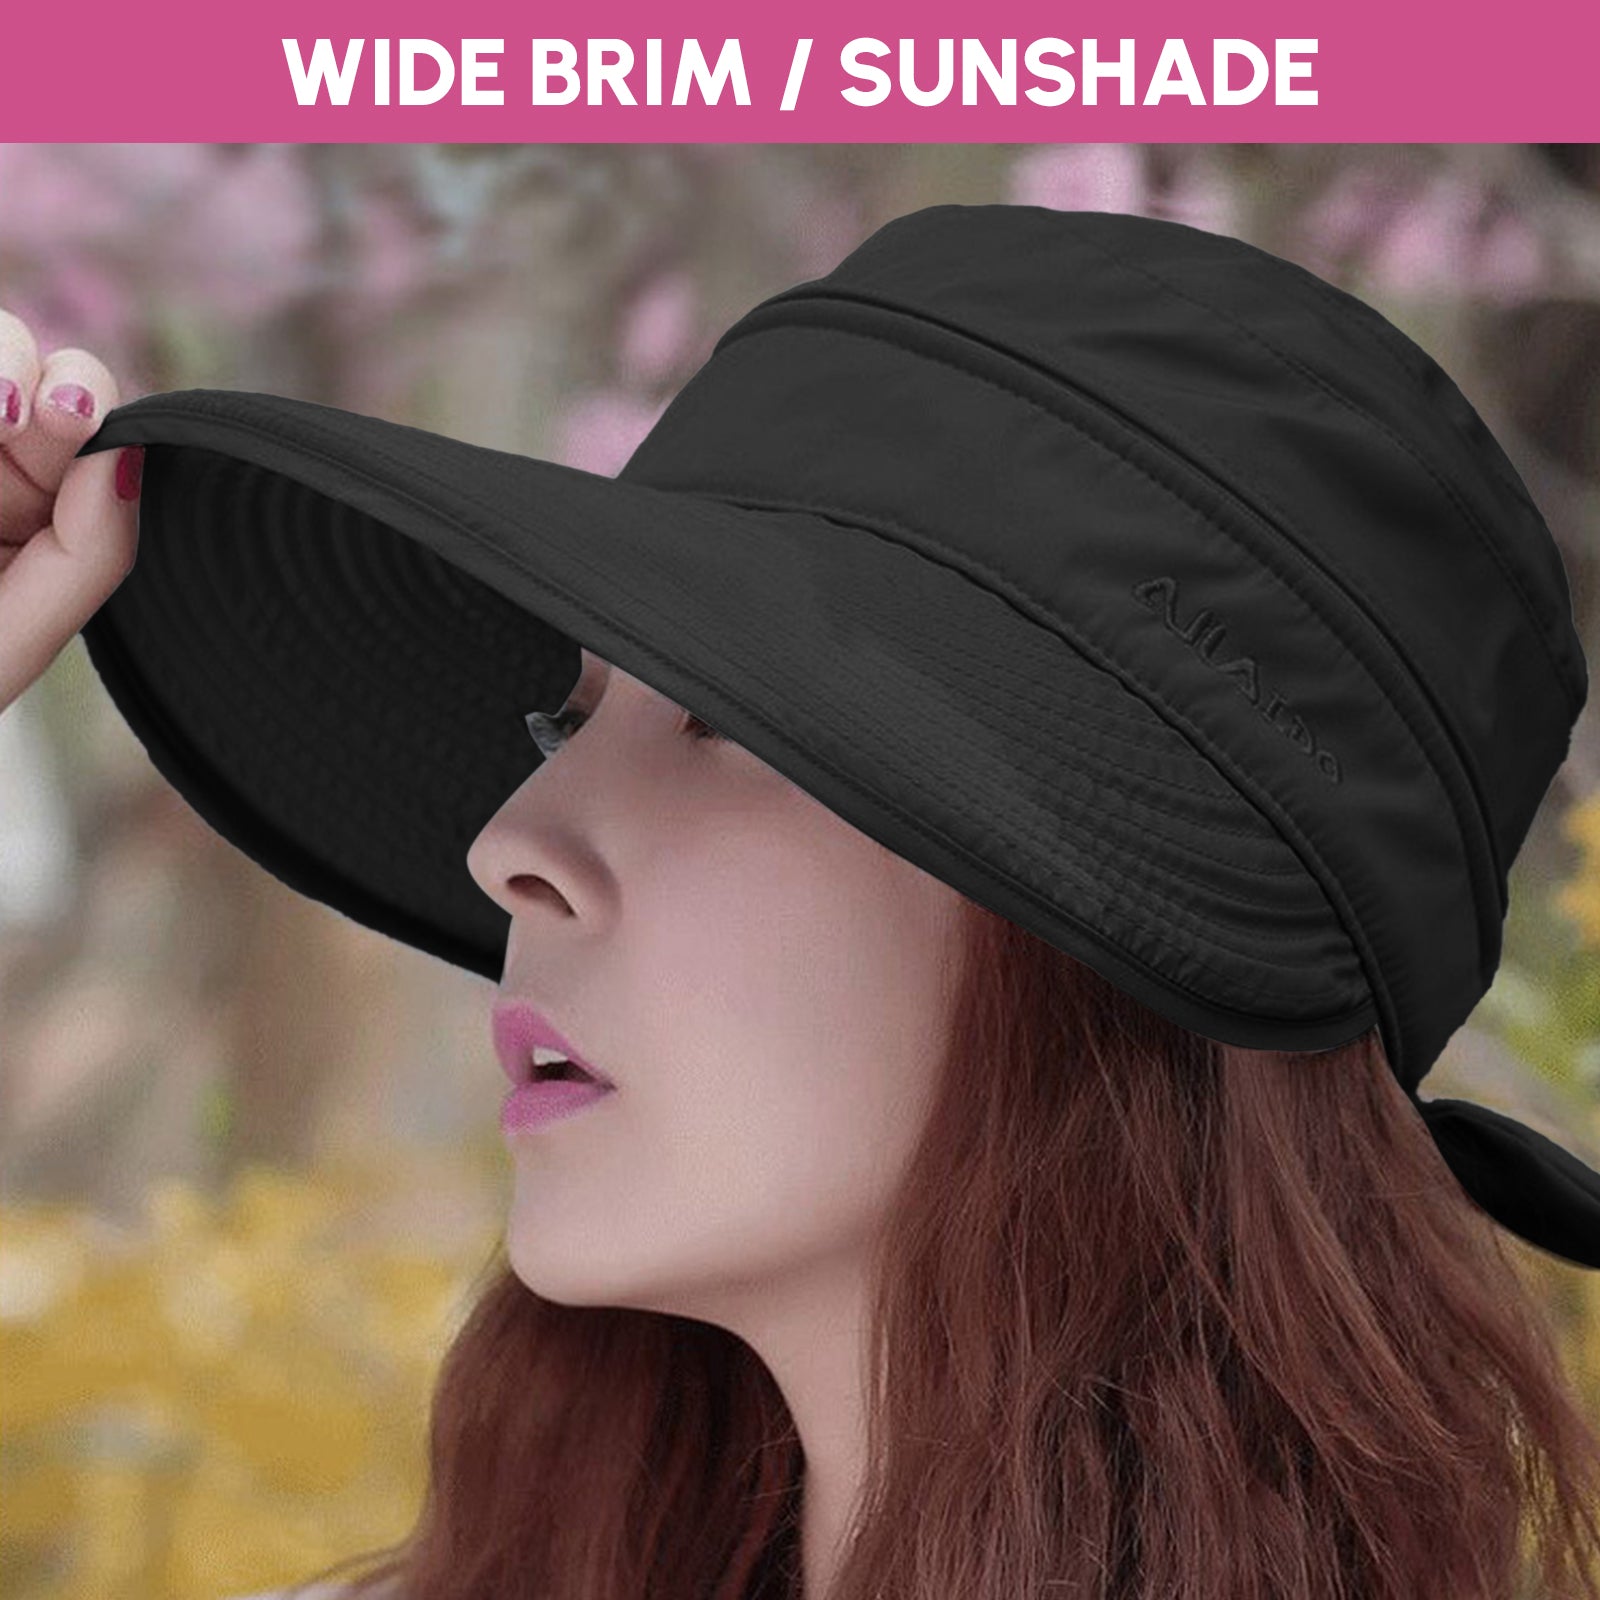 Travel in Style with this 2-in-1 Sun Visor Hat